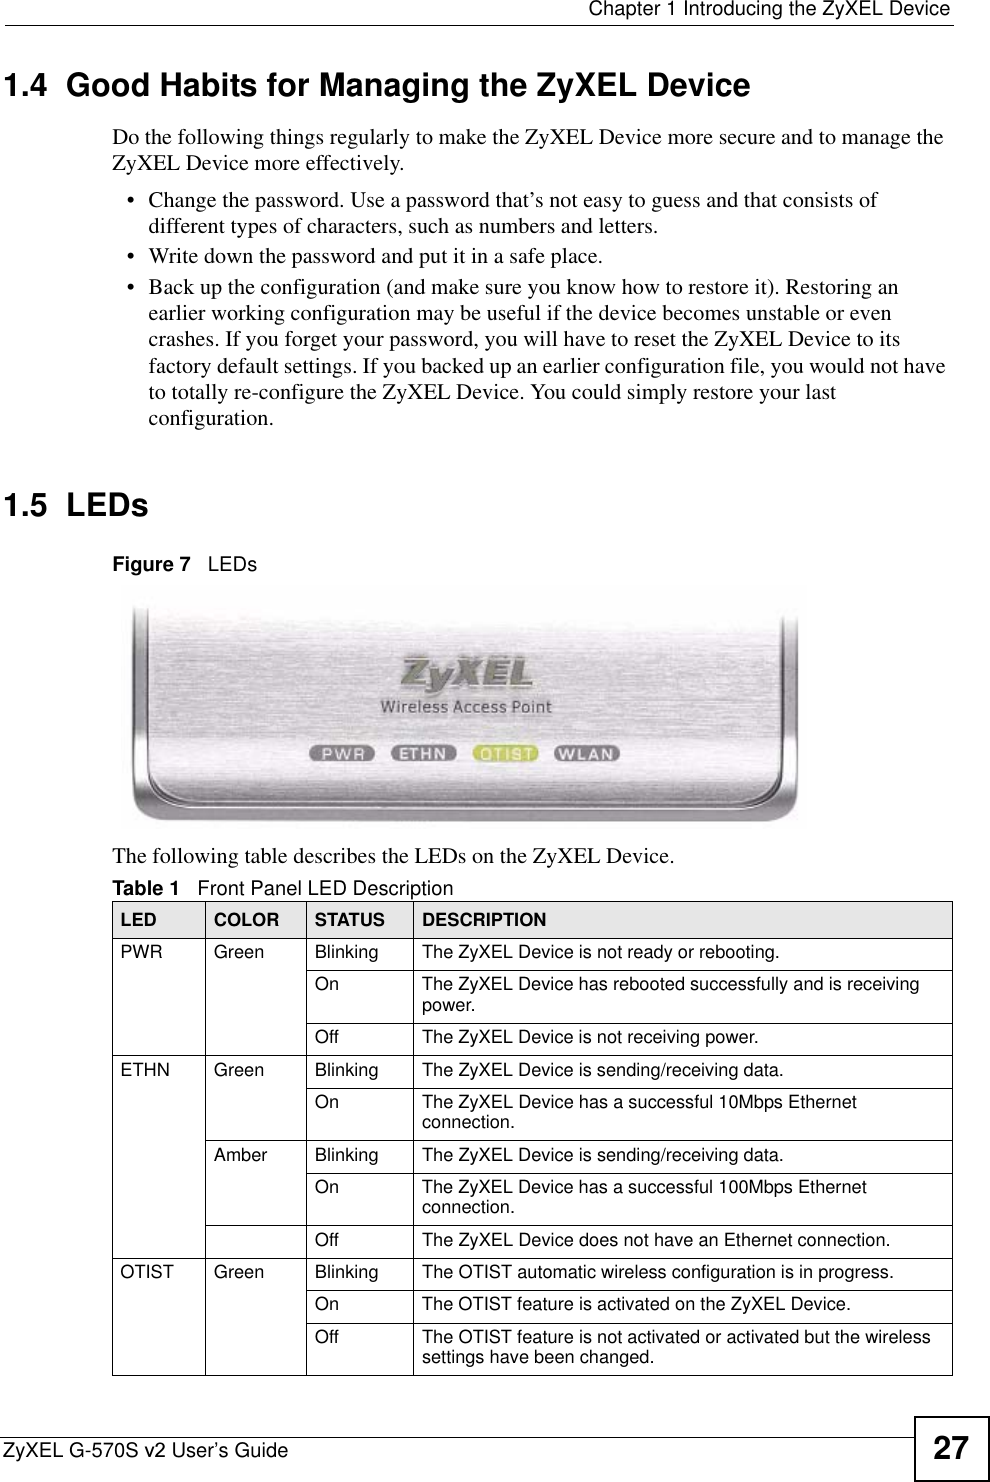  Chapter 1 Introducing the ZyXEL DeviceZyXEL G-570S v2 User’s Guide 271.4  Good Habits for Managing the ZyXEL DeviceDo the following things regularly to make the ZyXEL Device more secure and to manage the ZyXEL Device more effectively.• Change the password. Use a password that’s not easy to guess and that consists of different types of characters, such as numbers and letters.• Write down the password and put it in a safe place.• Back up the configuration (and make sure you know how to restore it). Restoring an earlier working configuration may be useful if the device becomes unstable or even crashes. If you forget your password, you will have to reset the ZyXEL Device to its factory default settings. If you backed up an earlier configuration file, you would not have to totally re-configure the ZyXEL Device. You could simply restore your last configuration.1.5  LEDsFigure 7   LEDsThe following table describes the LEDs on the ZyXEL Device.Table 1   Front Panel LED DescriptionLED COLOR STATUS DESCRIPTIONPWR Green Blinking The ZyXEL Device is not ready or rebooting.On The ZyXEL Device has rebooted successfully and is receiving power.Off The ZyXEL Device is not receiving power.ETHN Green Blinking The ZyXEL Device is sending/receiving data.On The ZyXEL Device has a successful 10Mbps Ethernet connection.Amber Blinking The ZyXEL Device is sending/receiving data.On The ZyXEL Device has a successful 100Mbps Ethernet connection.Off The ZyXEL Device does not have an Ethernet connection.OTIST Green Blinking The OTIST automatic wireless configuration is in progress.On The OTIST feature is activated on the ZyXEL Device.Off The OTIST feature is not activated or activated but the wireless settings have been changed.